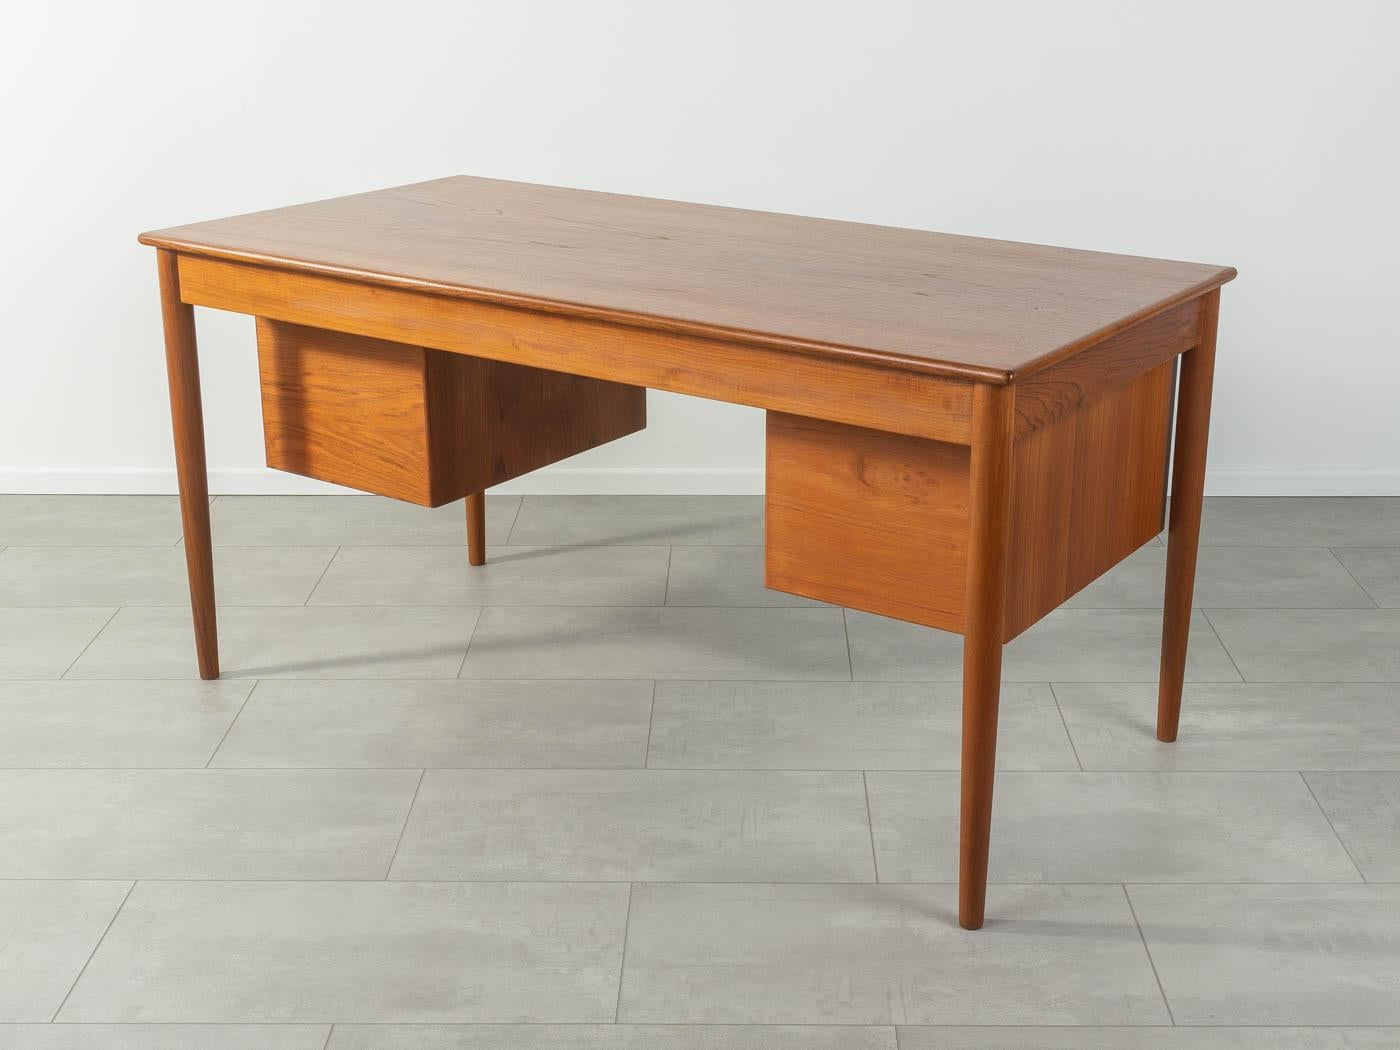 Classic freestanding desk by Børge Mogensen for Søborg Møbler from the 1960s. Corpus in teak veneer with five drawers and long legs.

Accomplished design: perfect proportions and visible attention to detail.
Digh quality workmanship using first